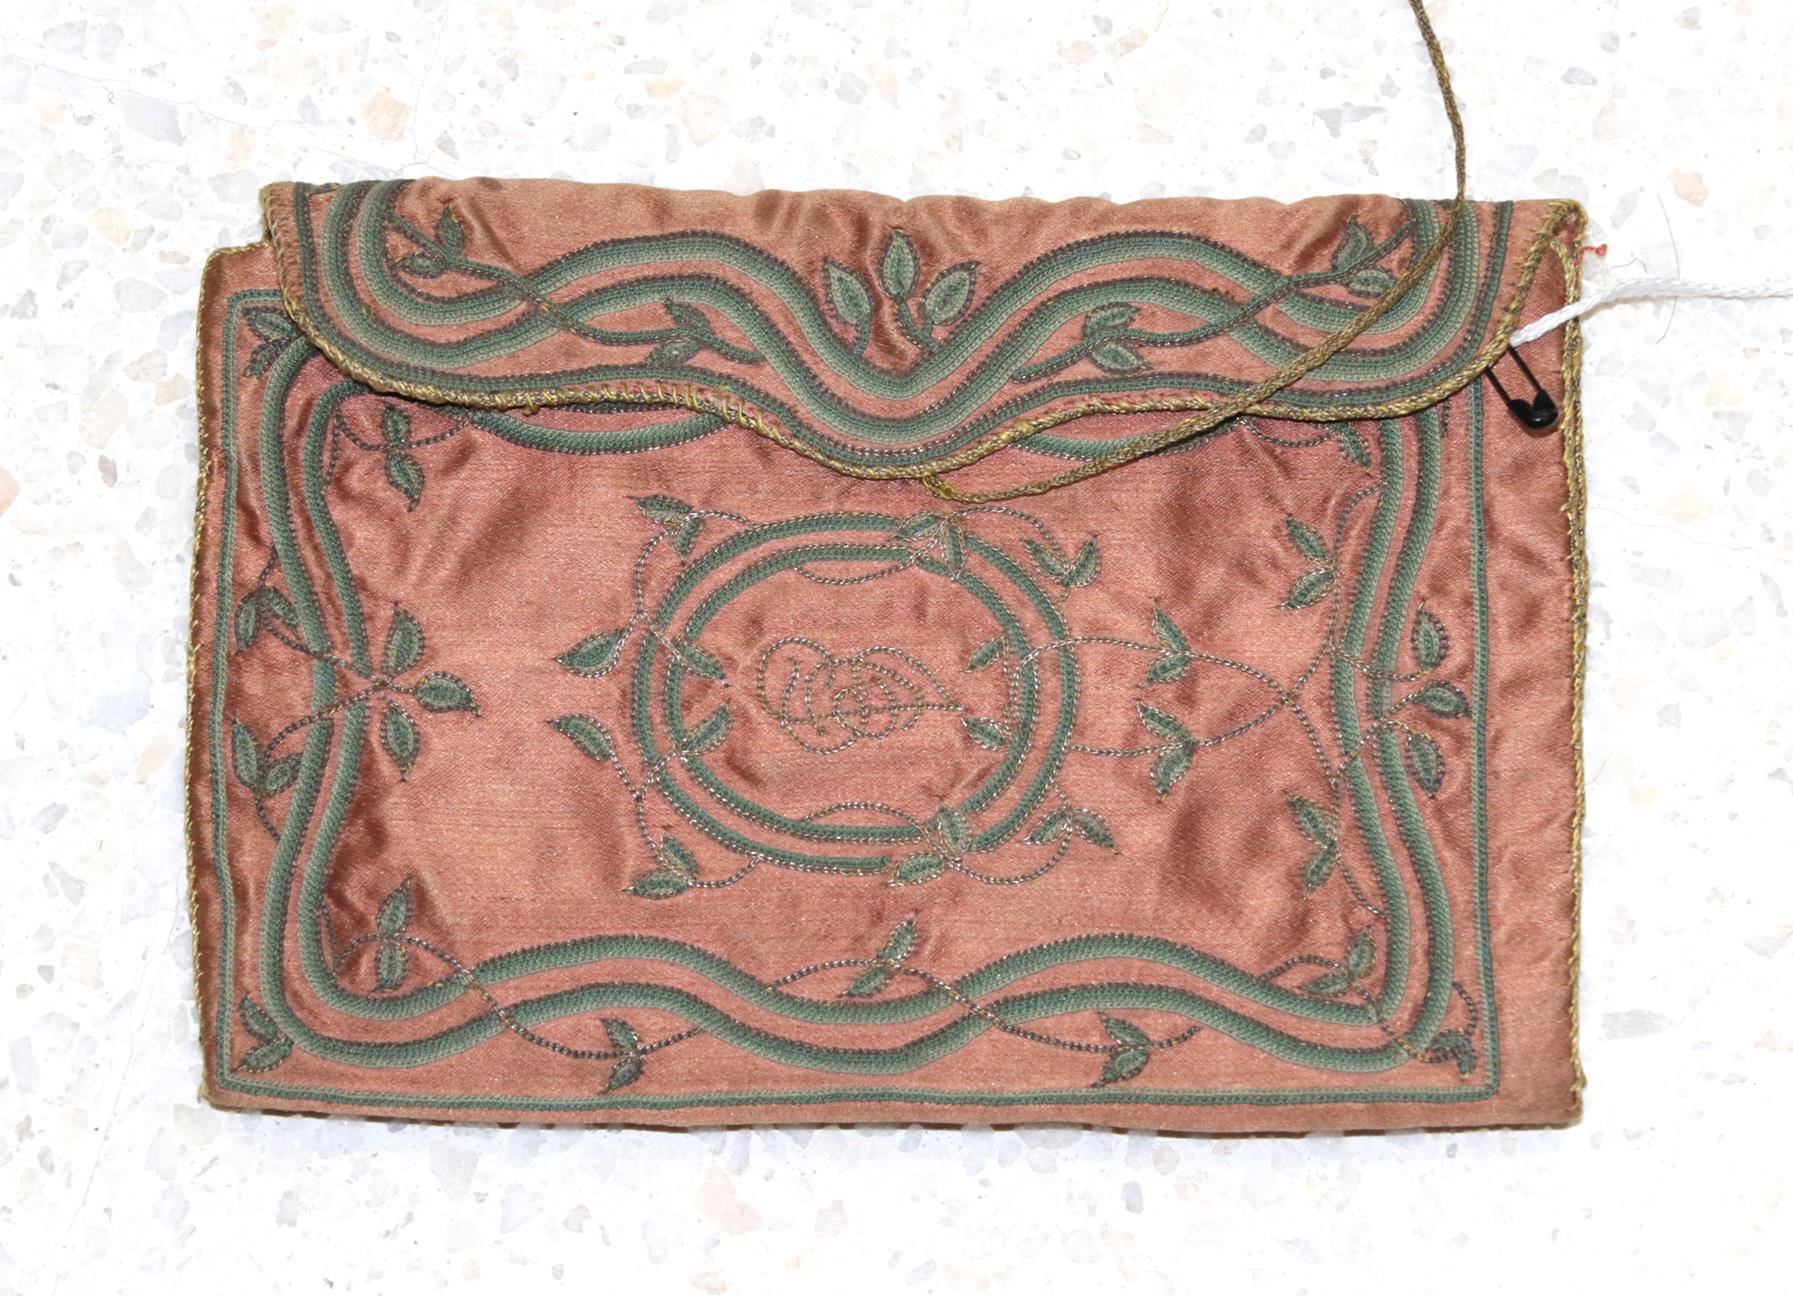 18th Century Rust Red Silk Pocket Book, with decorative green sinuous stem and leaf embroidery